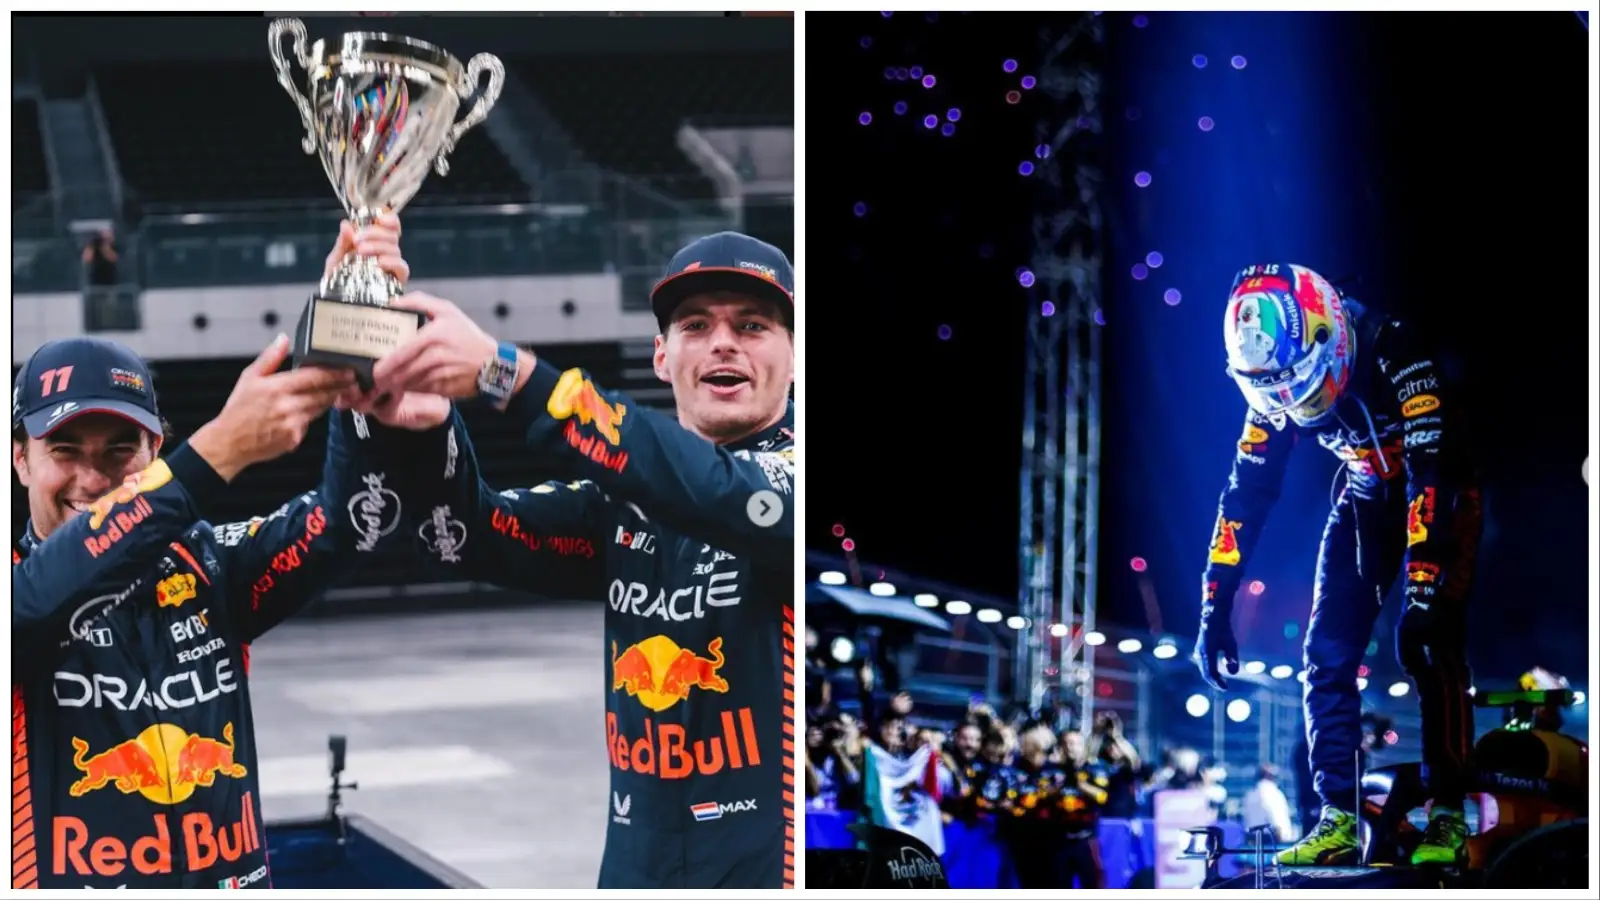 BacktoBack Constructors Championship for the Red Bull Racing